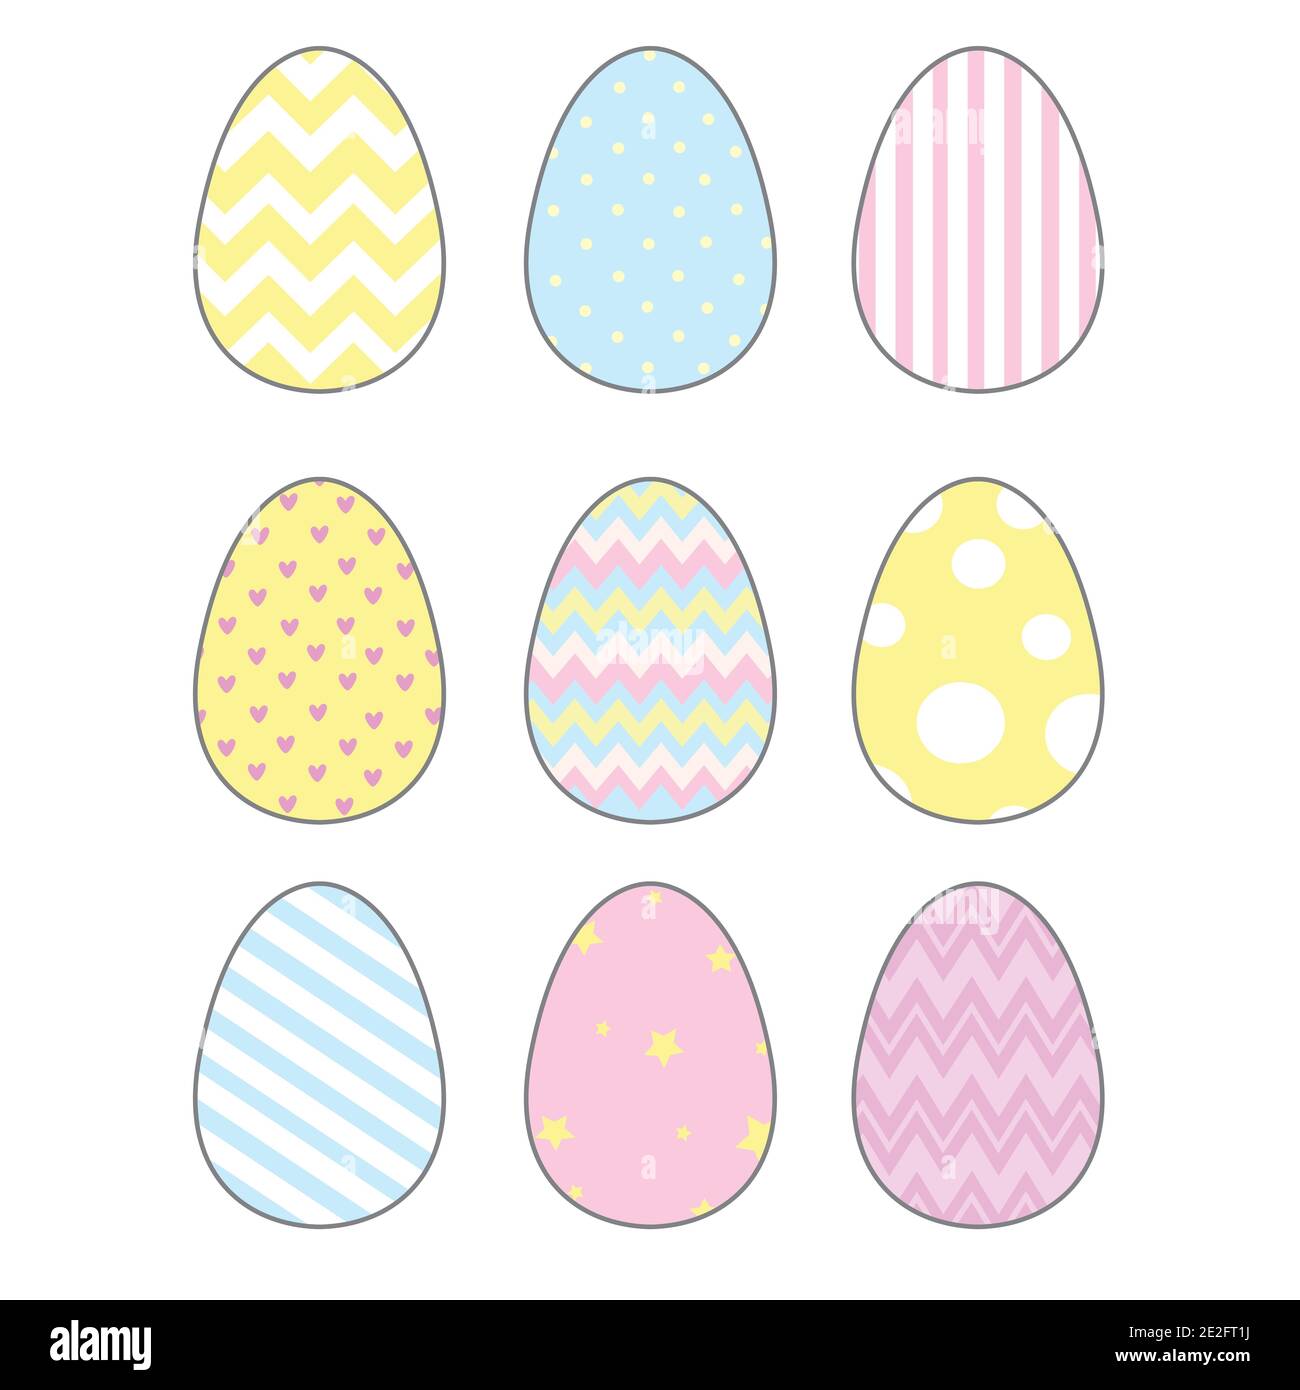 Easter eggs vector icons flat style. Stock Vector